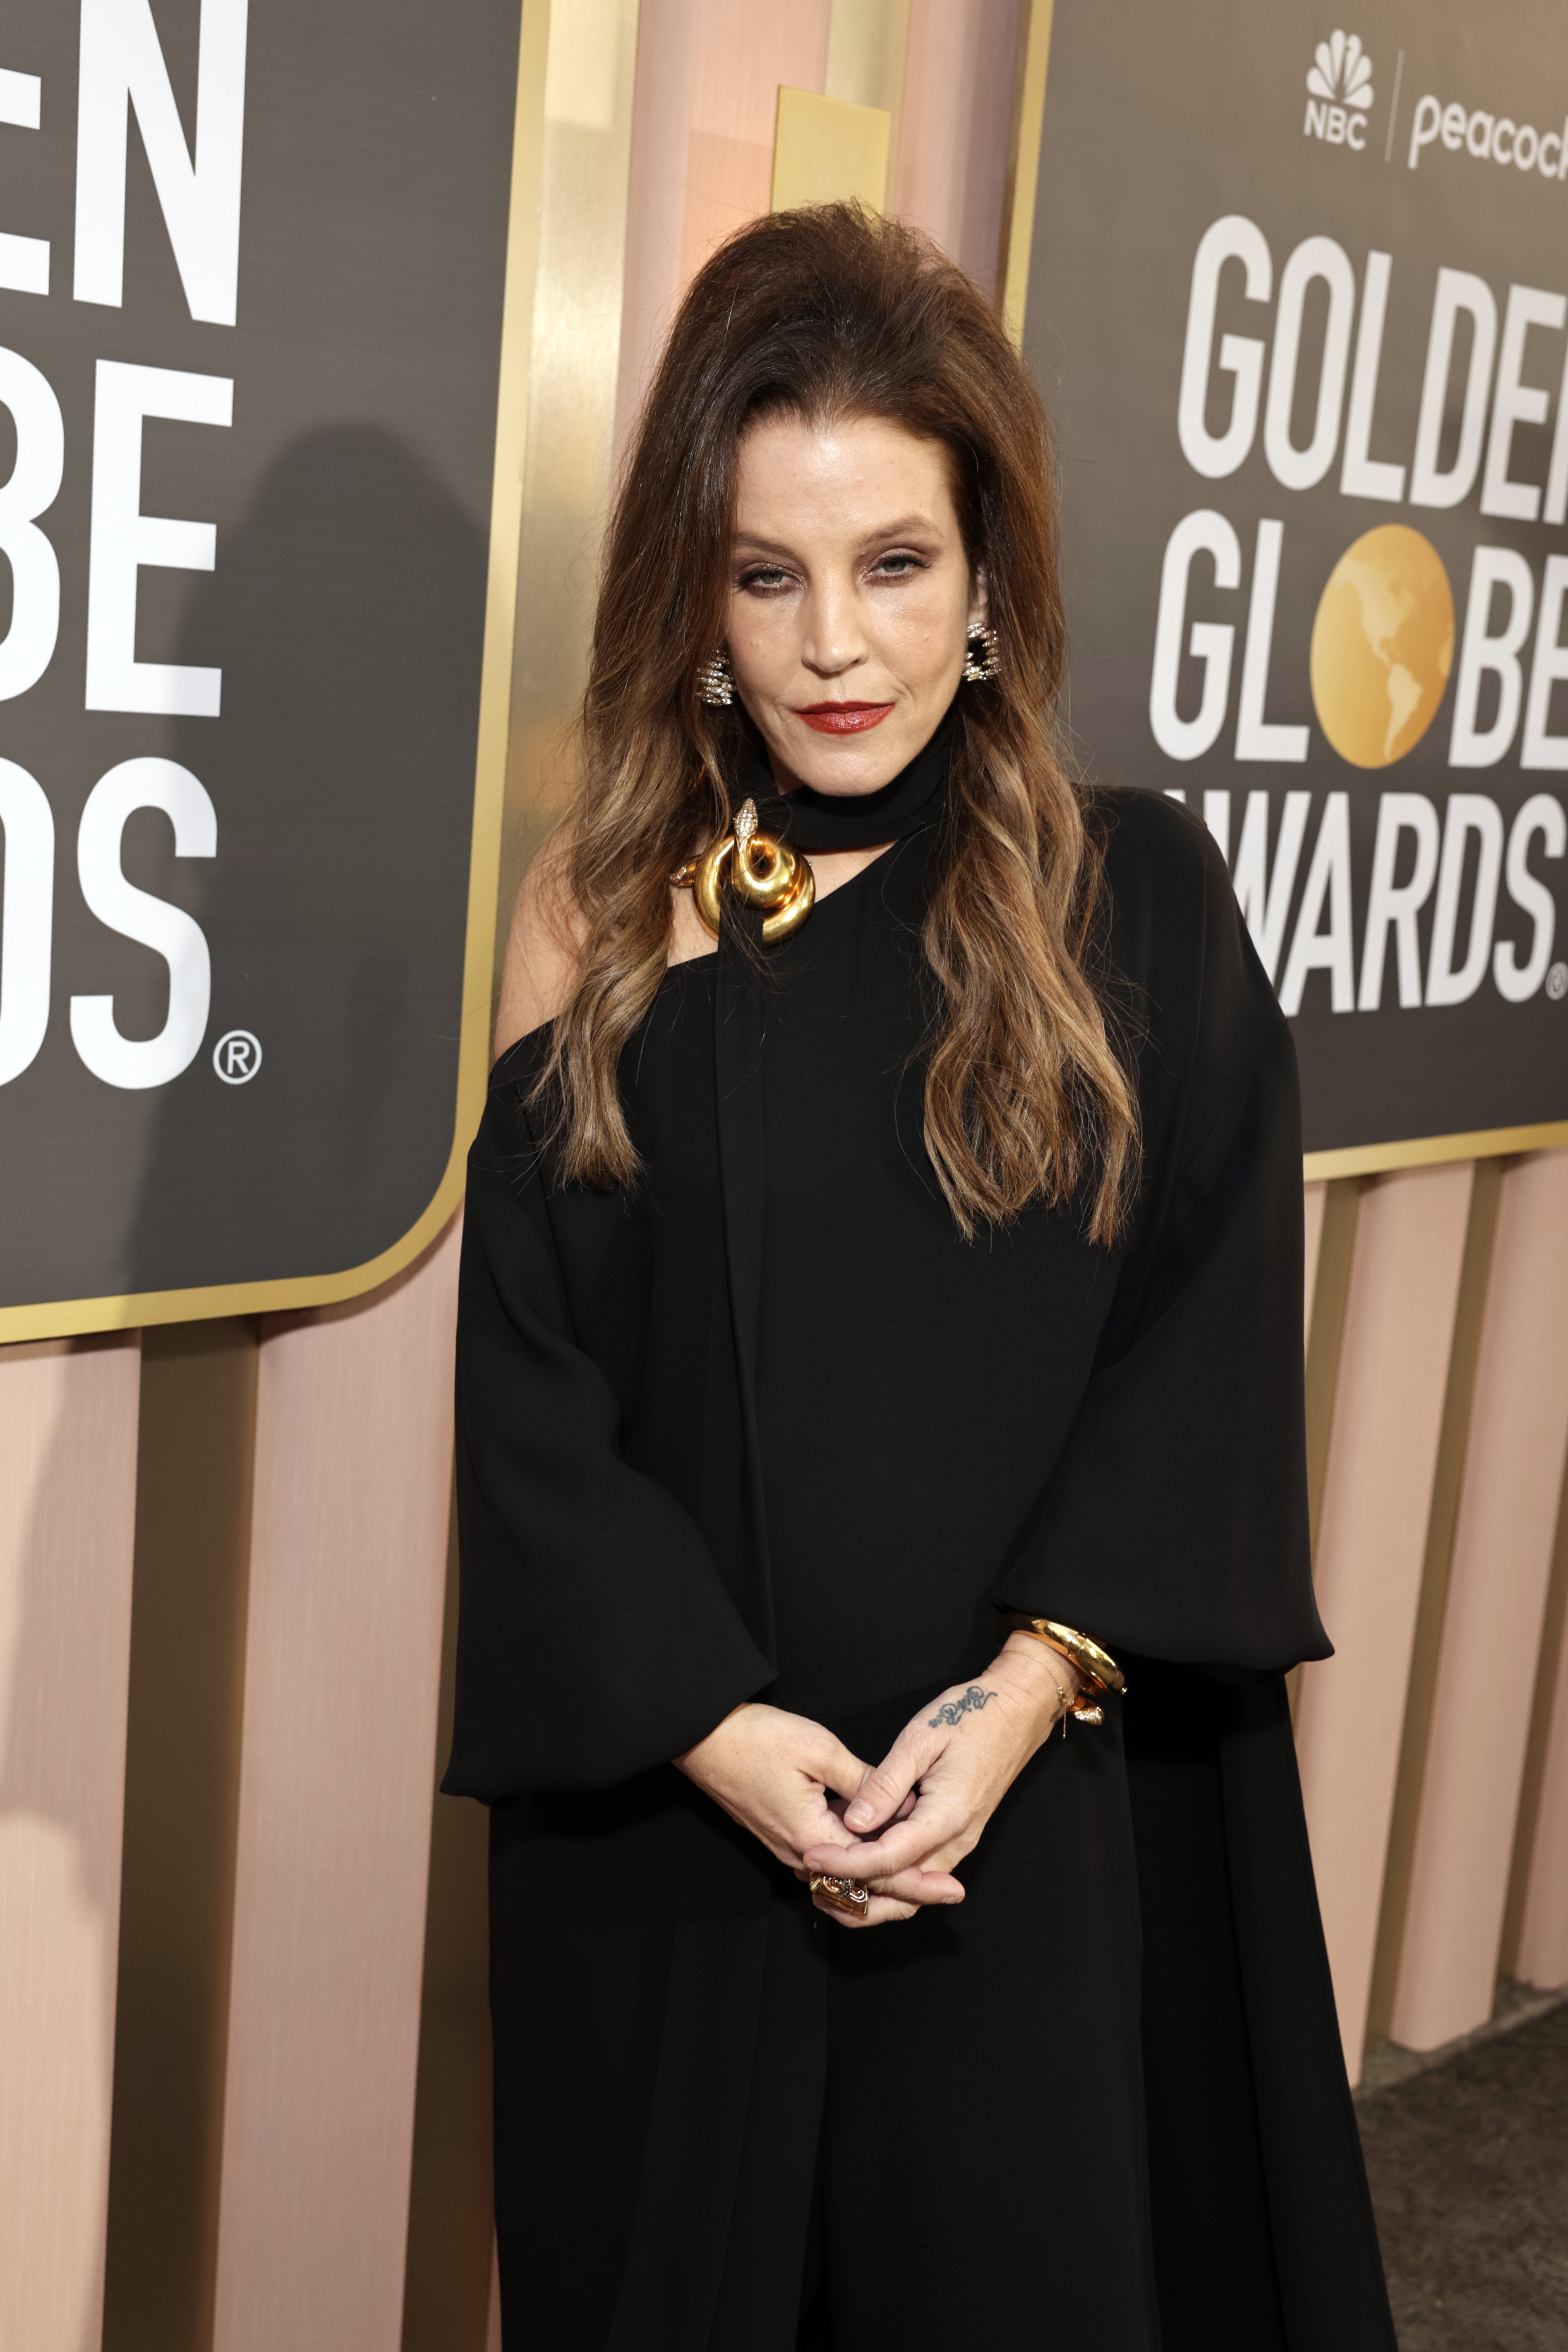 Lisa Marie Presley at the 80th Annual Golden Globe Awards on January 10, 2023, in Beverly Hills, California | Source: Getty Images